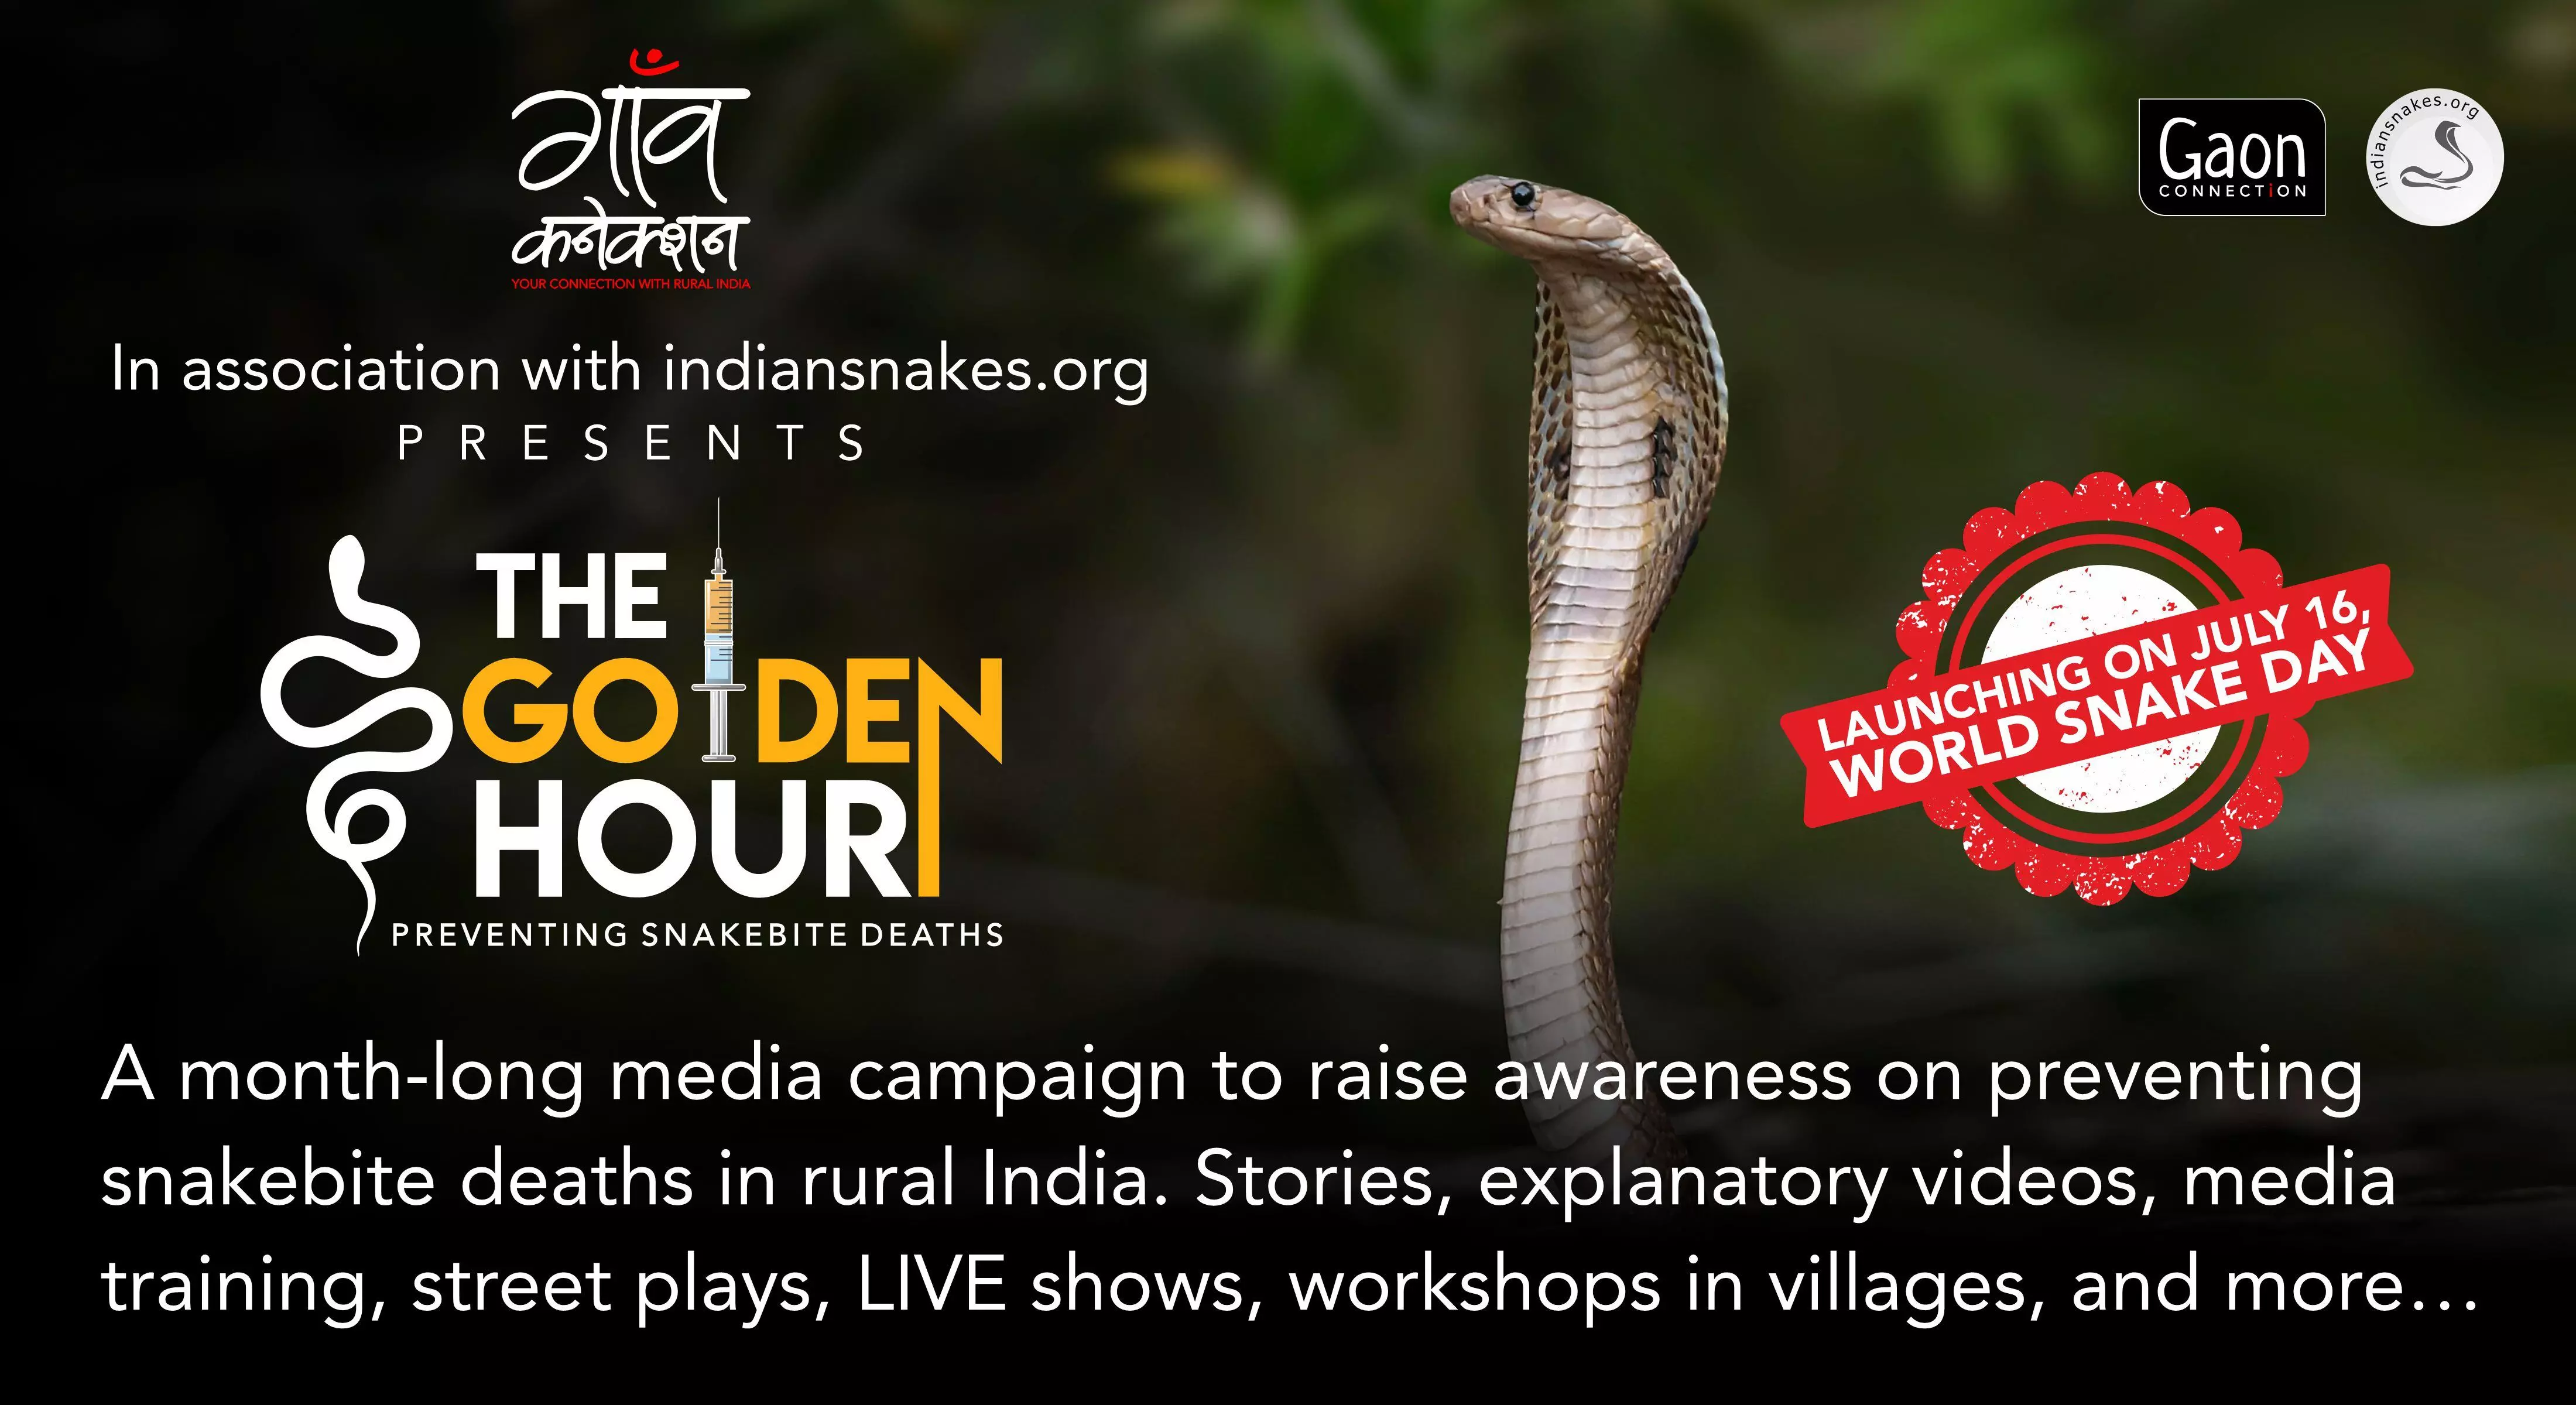 Gaon Connection launches The Golden Hour campaign to raise awareness on snakebite deaths